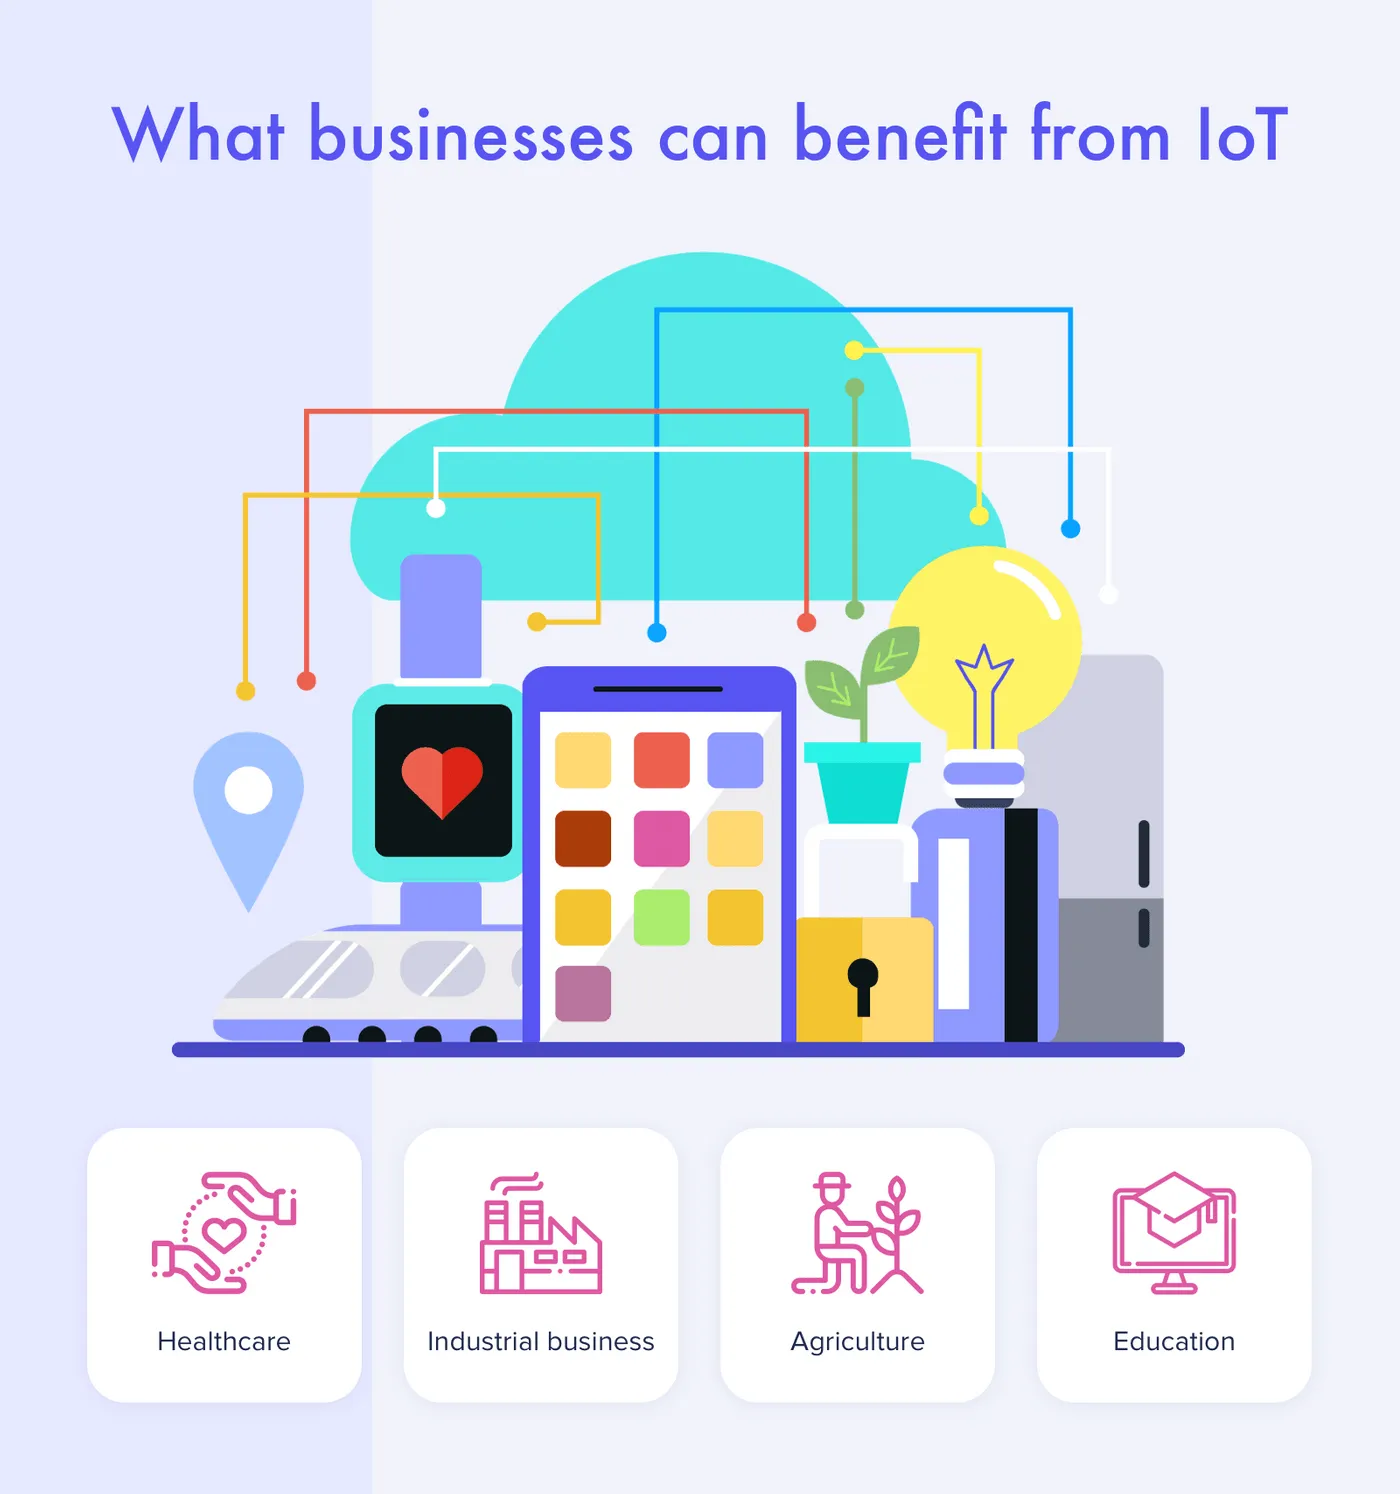 What opportunities can IoT bring to different businesses